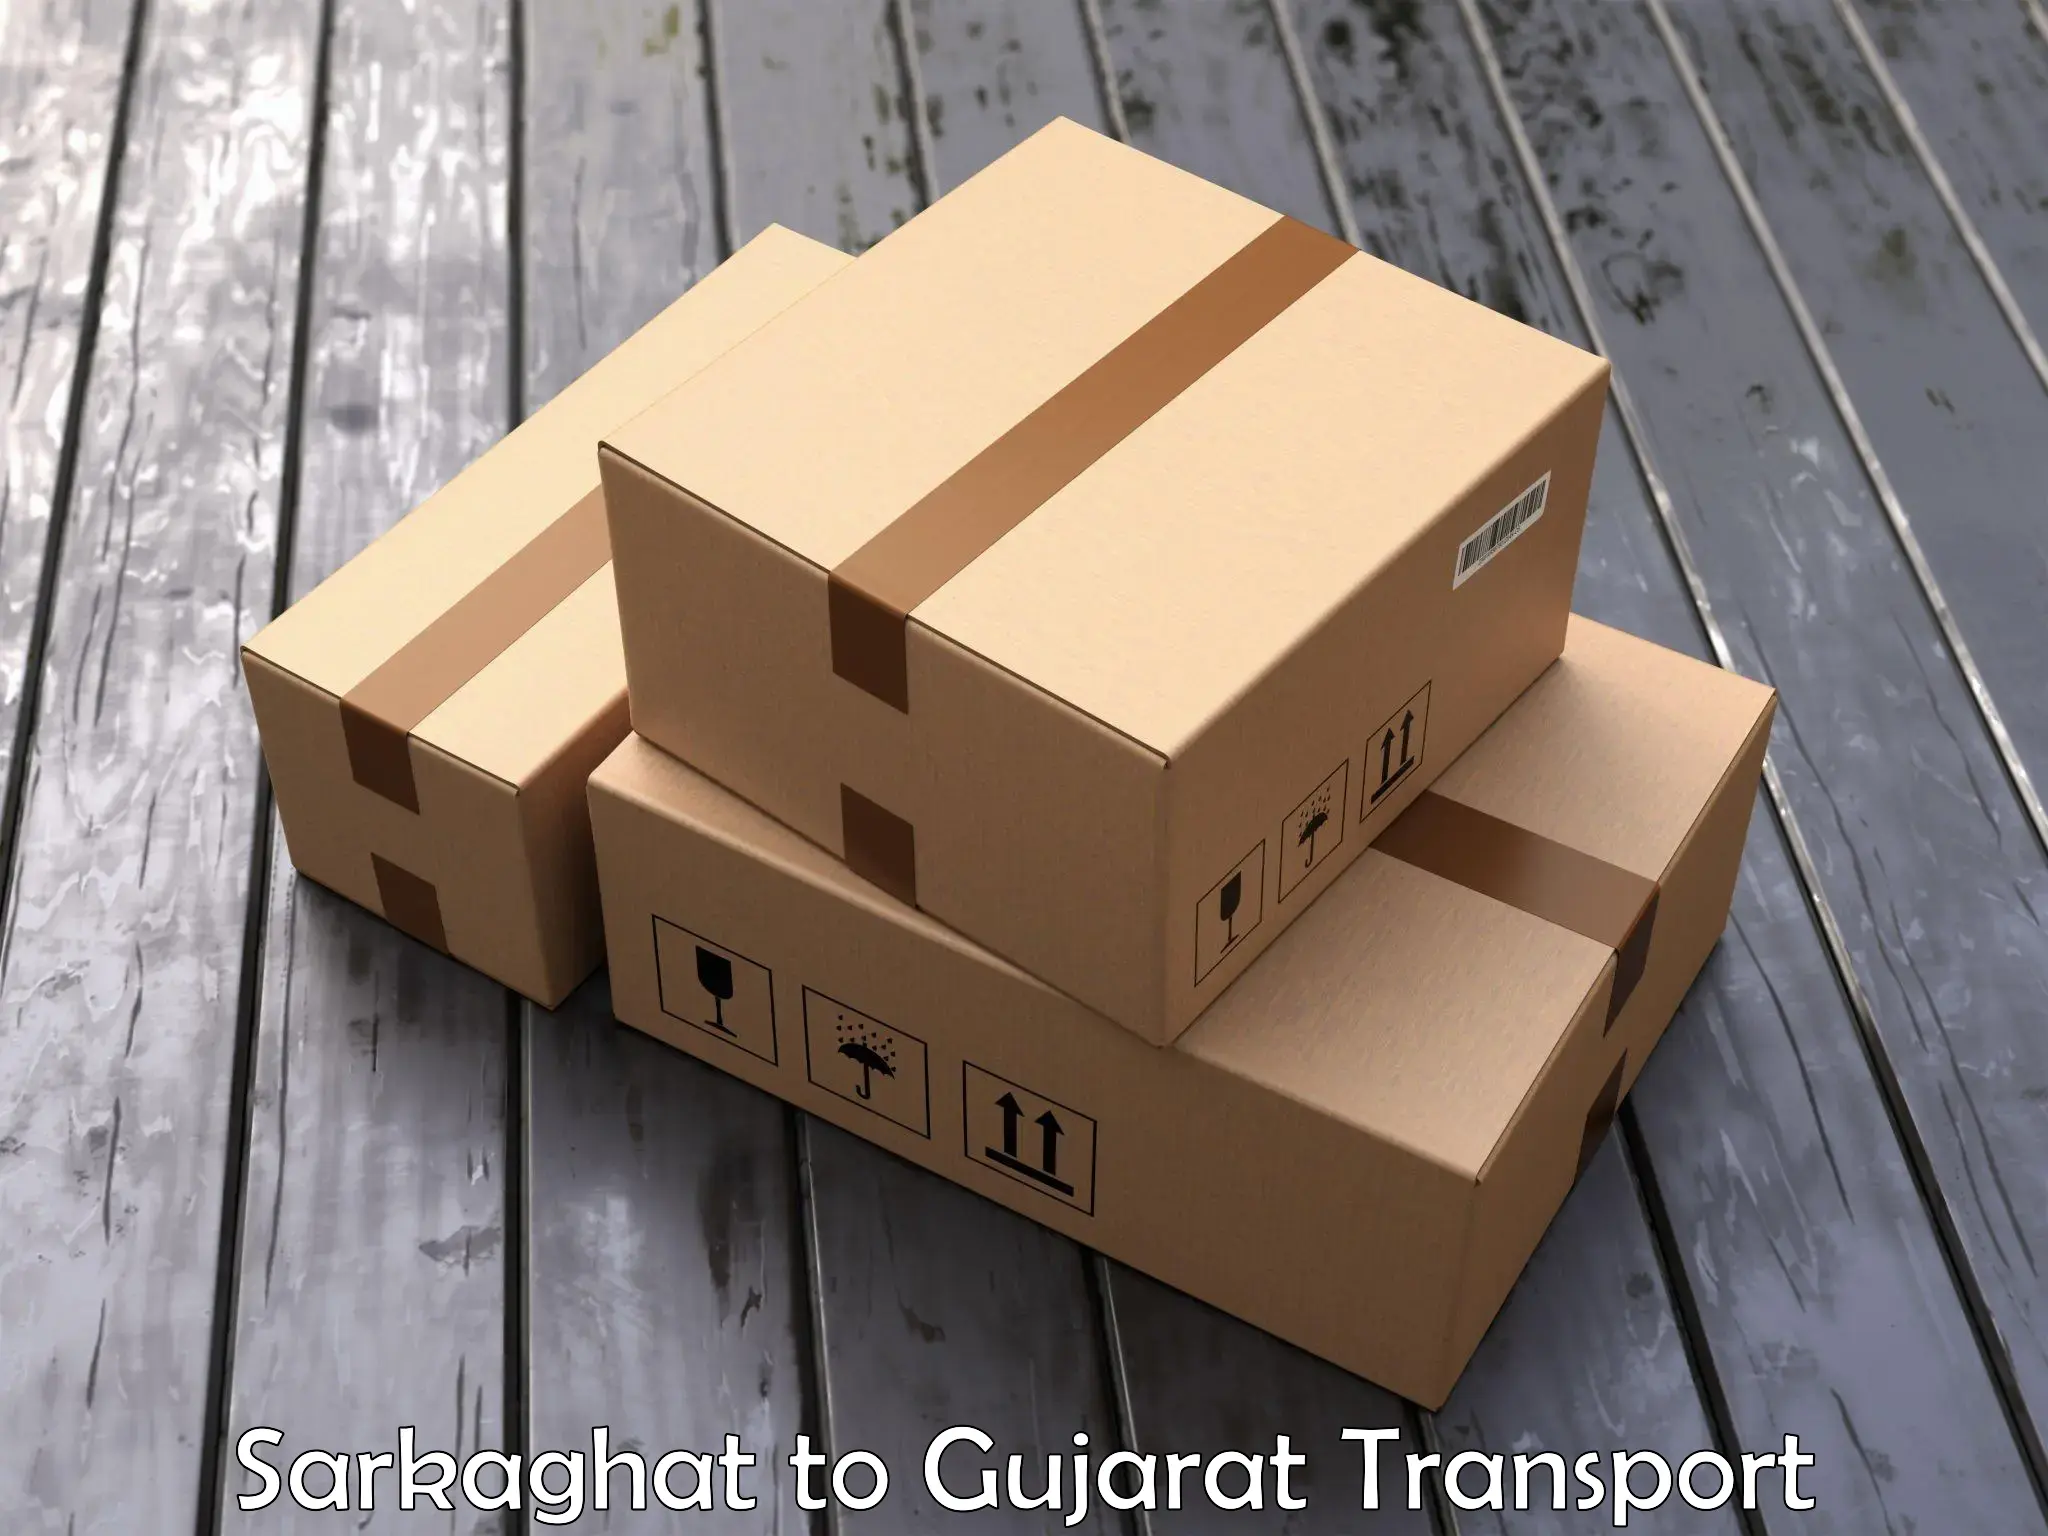 Cargo train transport services Sarkaghat to Gujarat